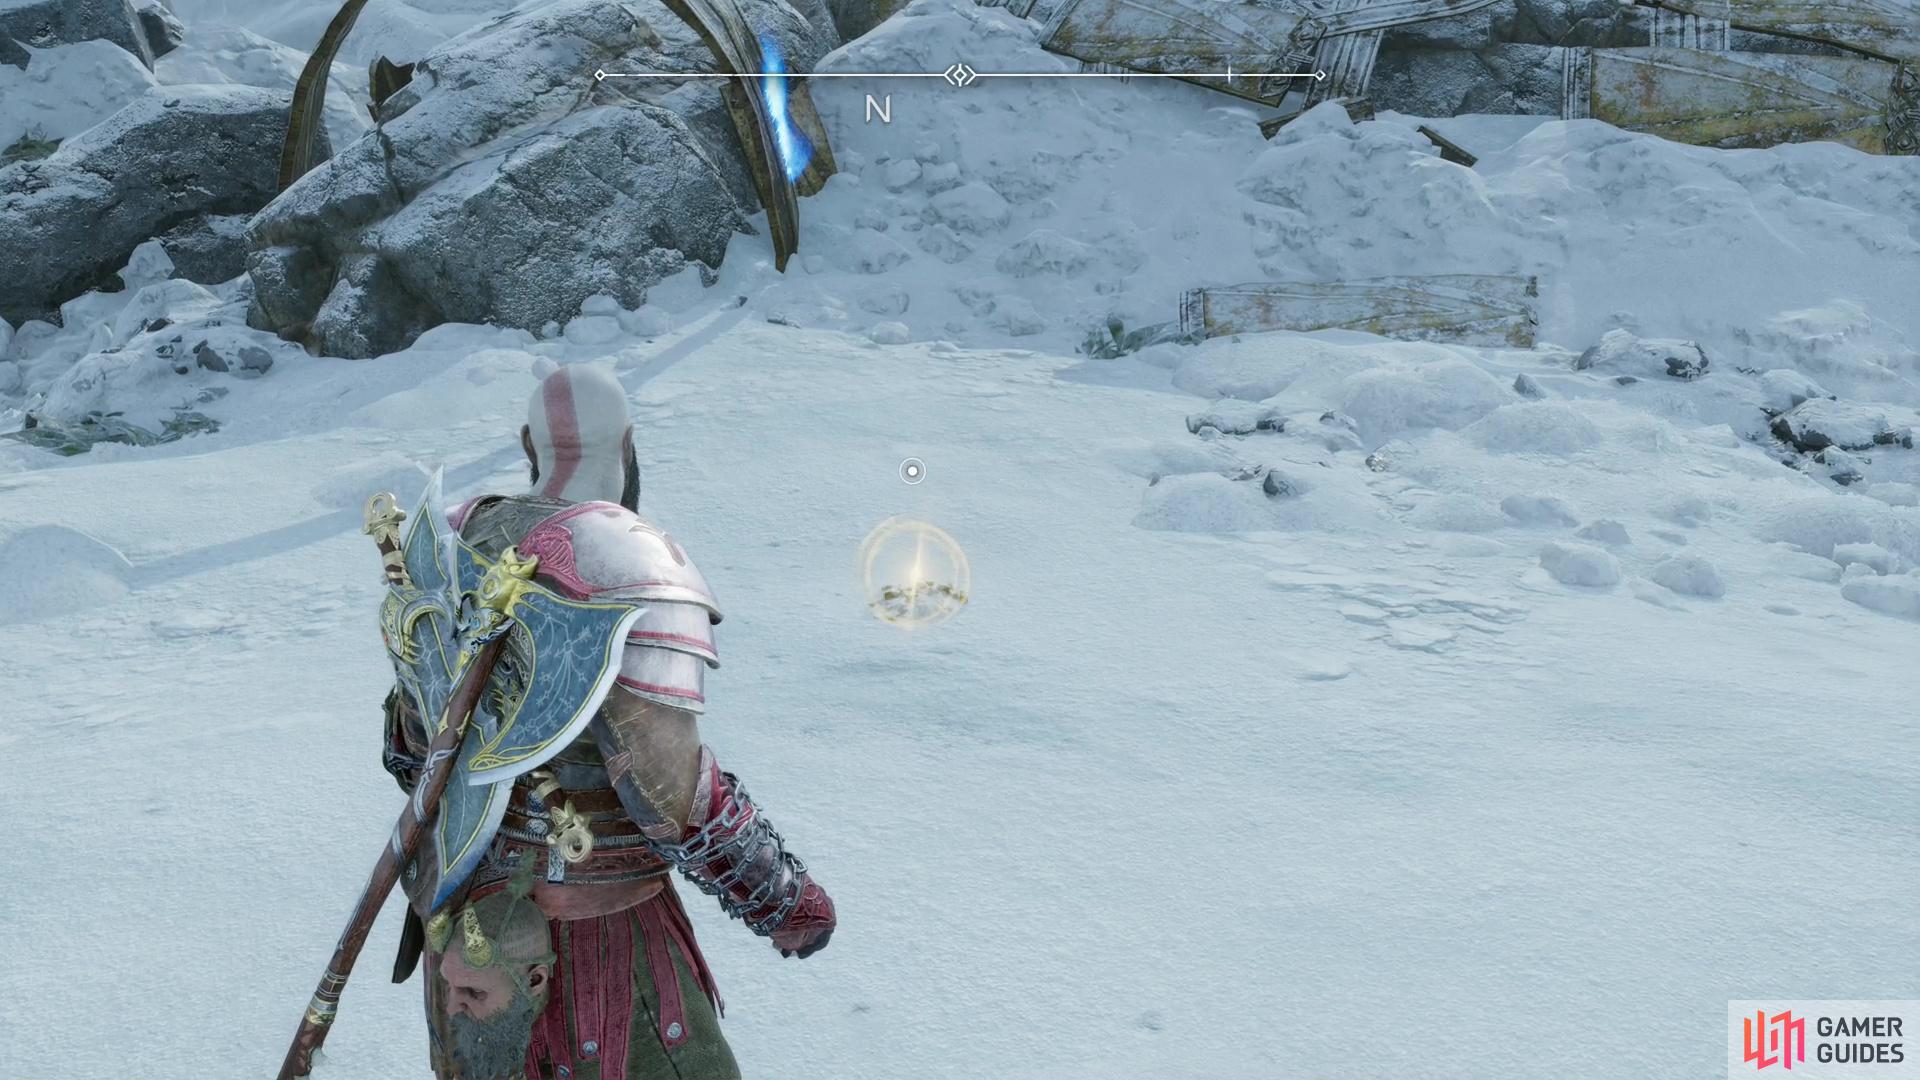 You can also find the Gauntlets of Guiding Light buried in the snow nearby.